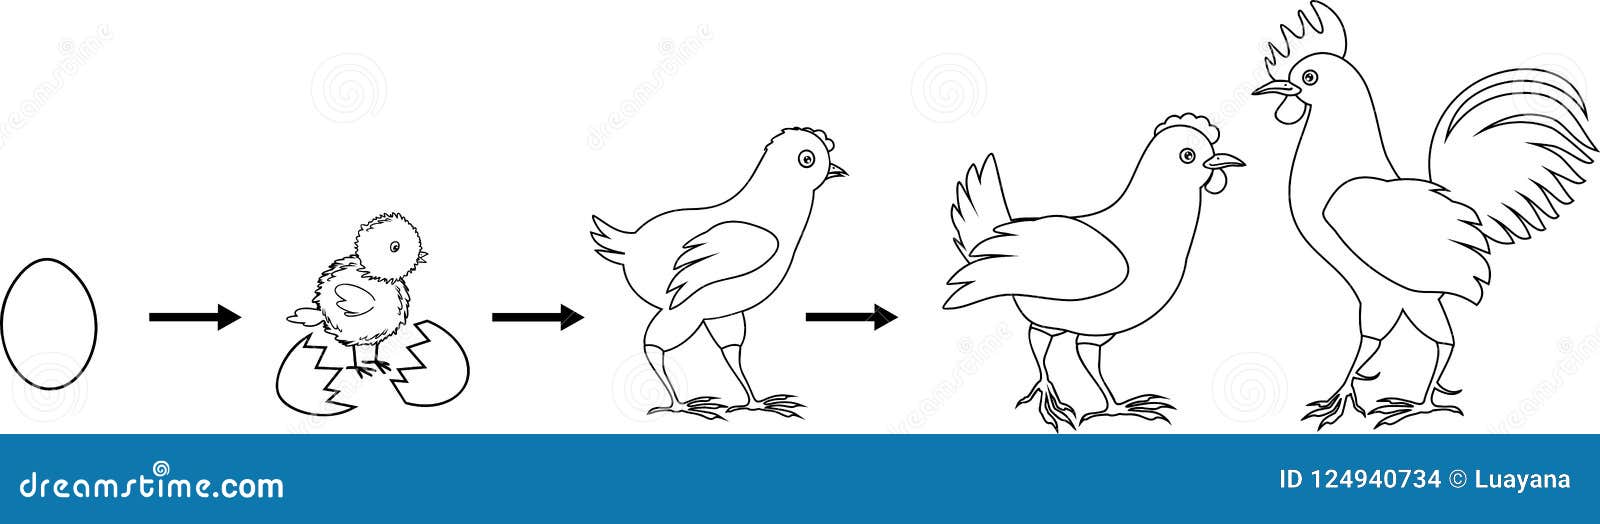 Coloring page stages of chicken growth from egg to adult bird stock vector